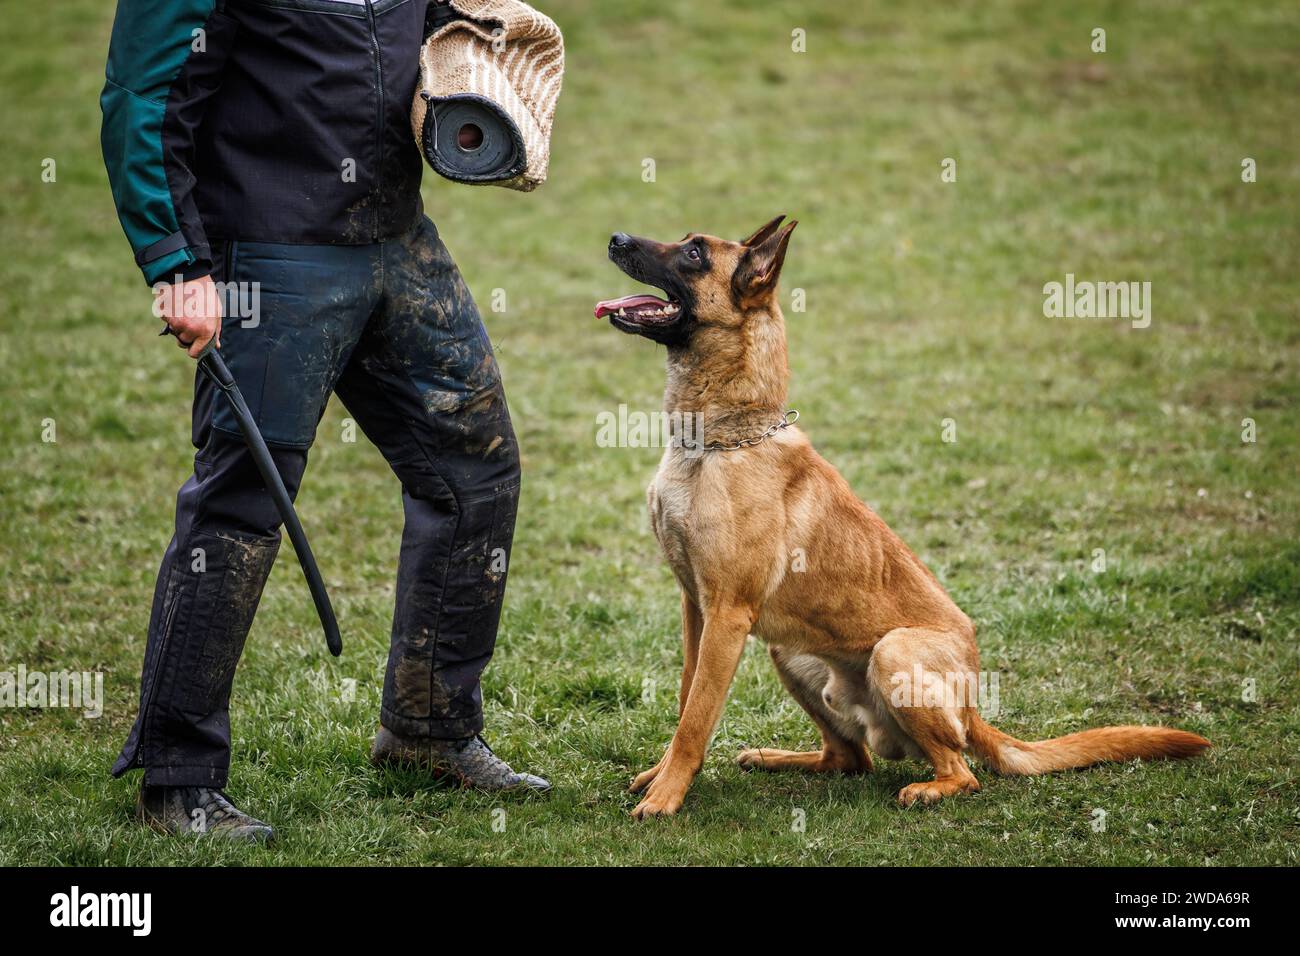 Animal obedience training. Belgian malinois dog is doing bite and defense work with police dog handler Stock Photo